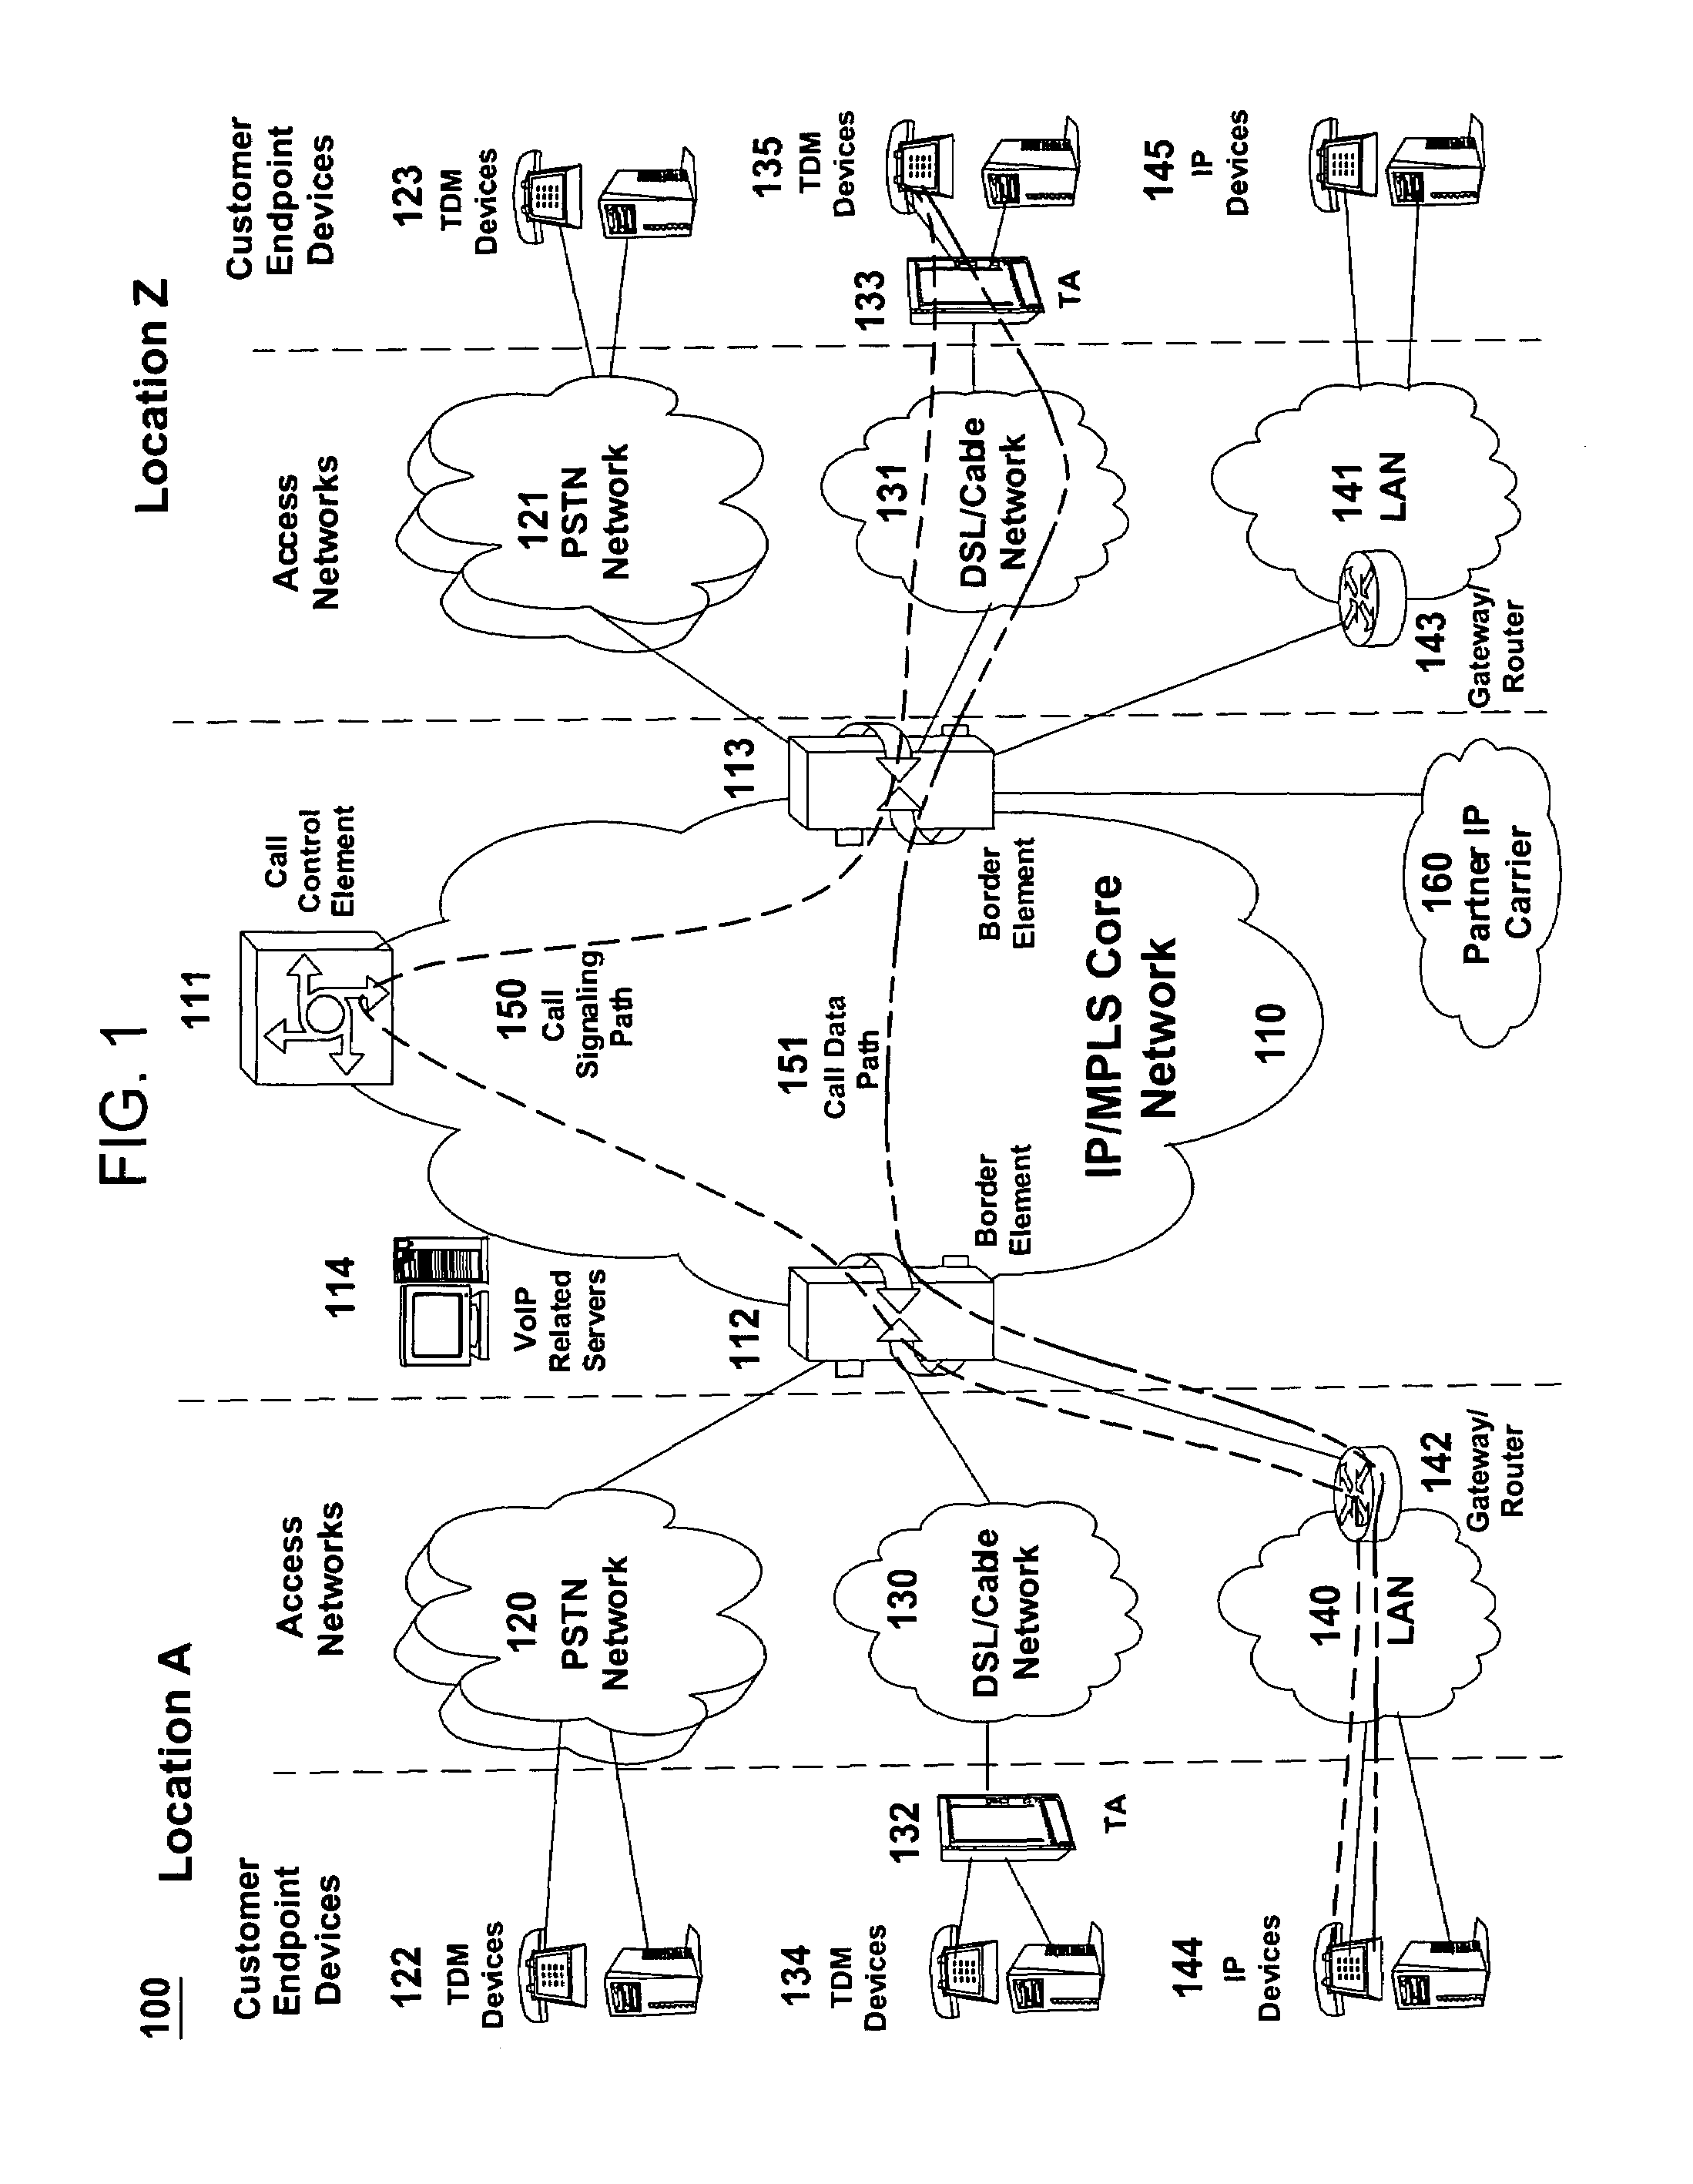 Method and apparatus for monitoring end-to-end performance in a network